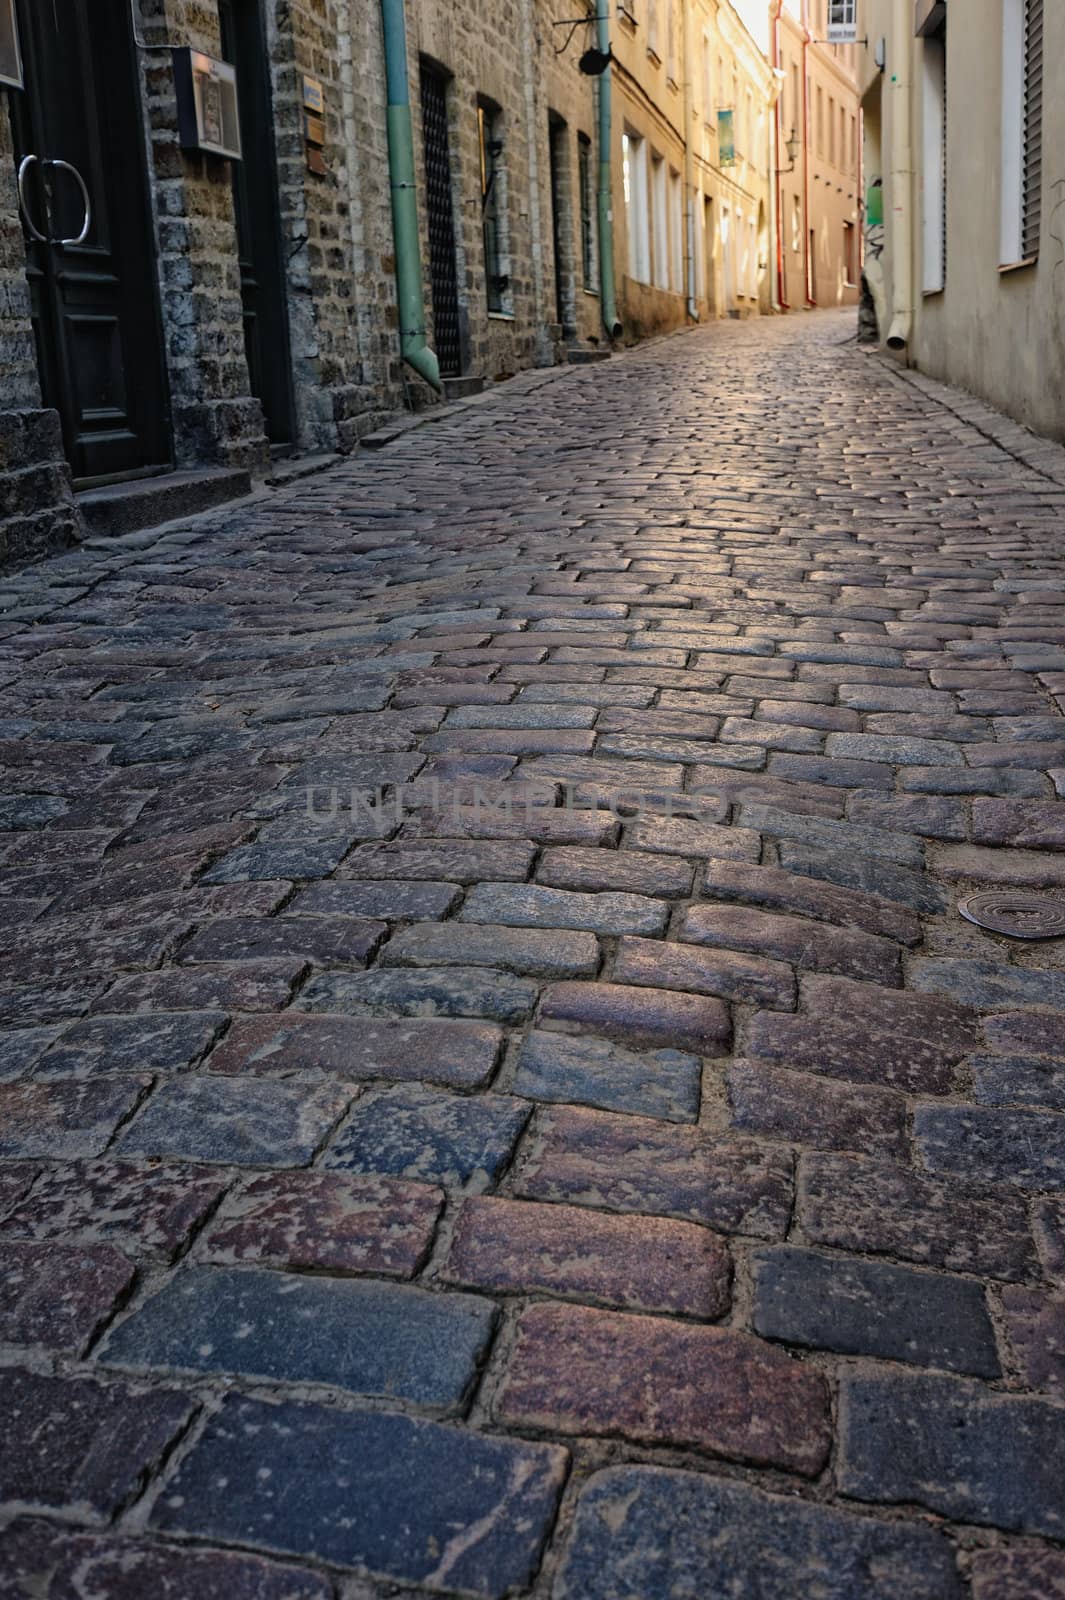 Сobblestone pavement in the narrow street in old town